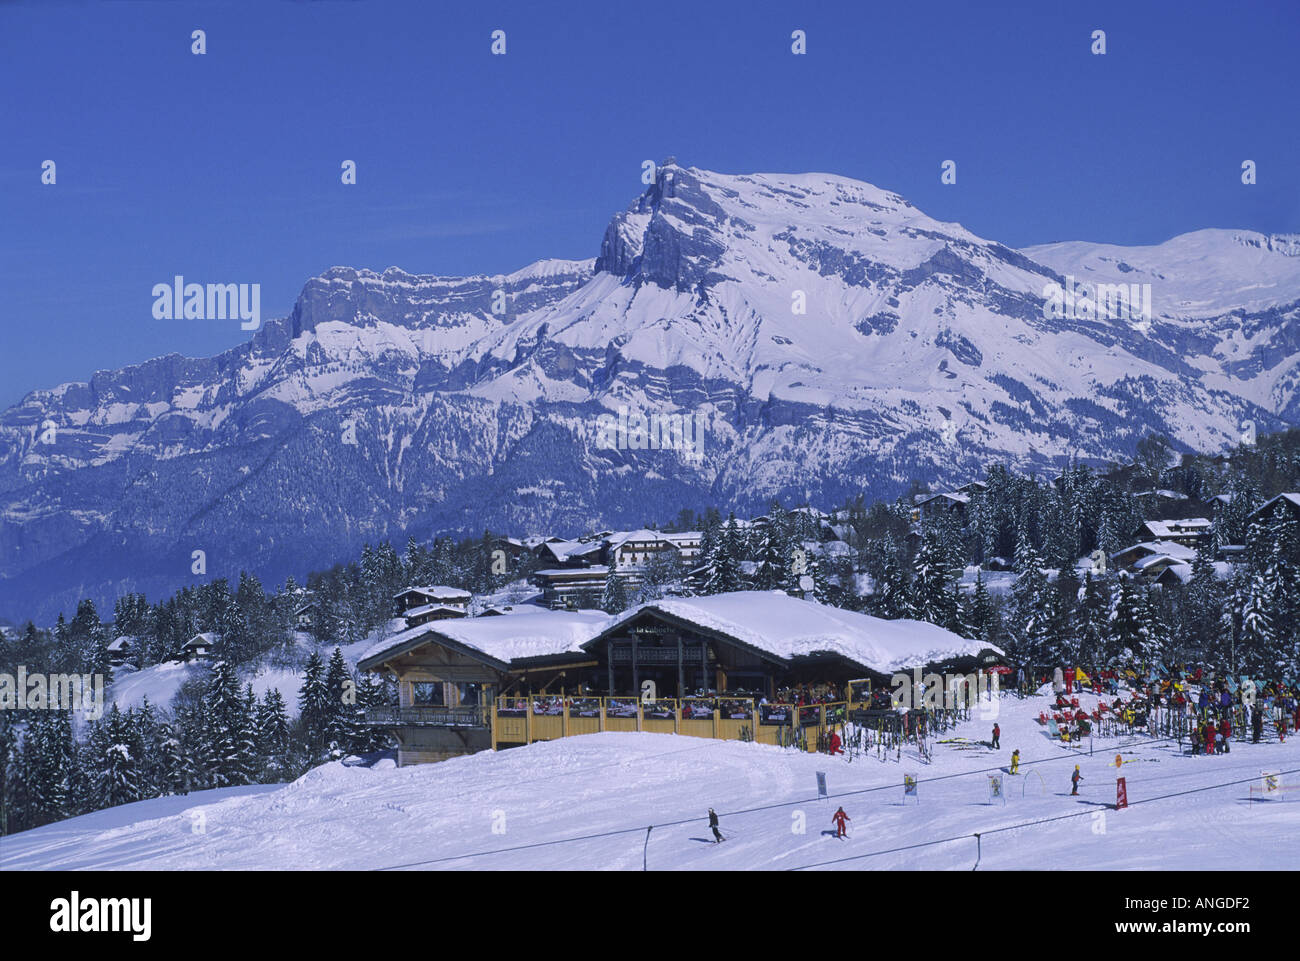 A view towards a mountain restaurant at the ski resort of Megeve, France. Stock Photo